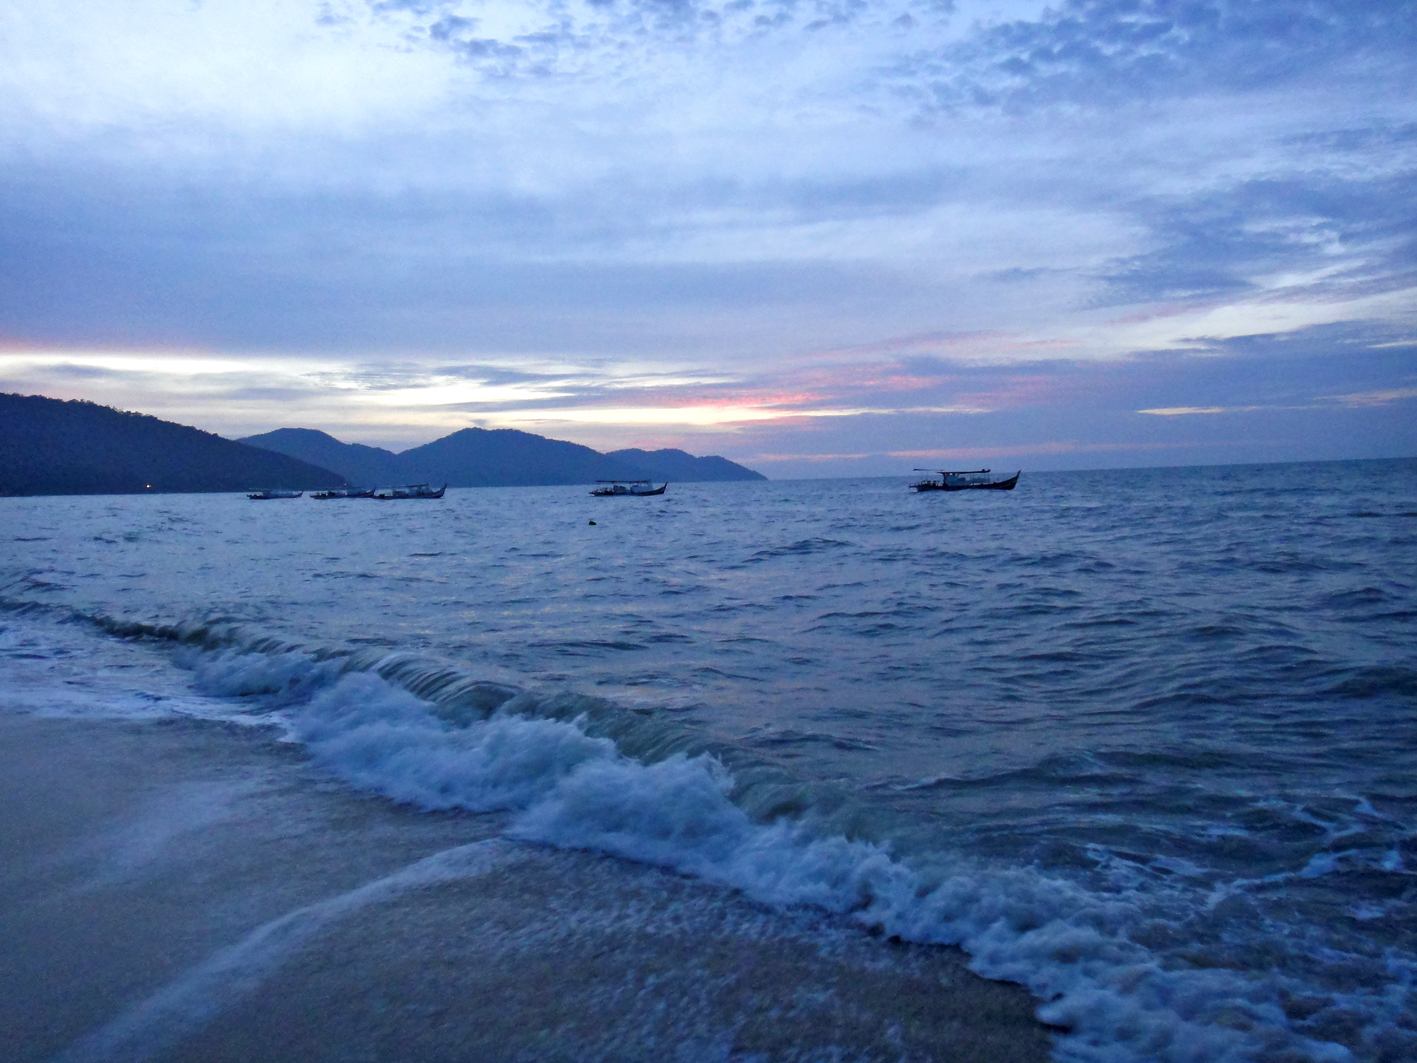 Phoebettmh Travel: (Malaysia) – 10 things to do in Penang